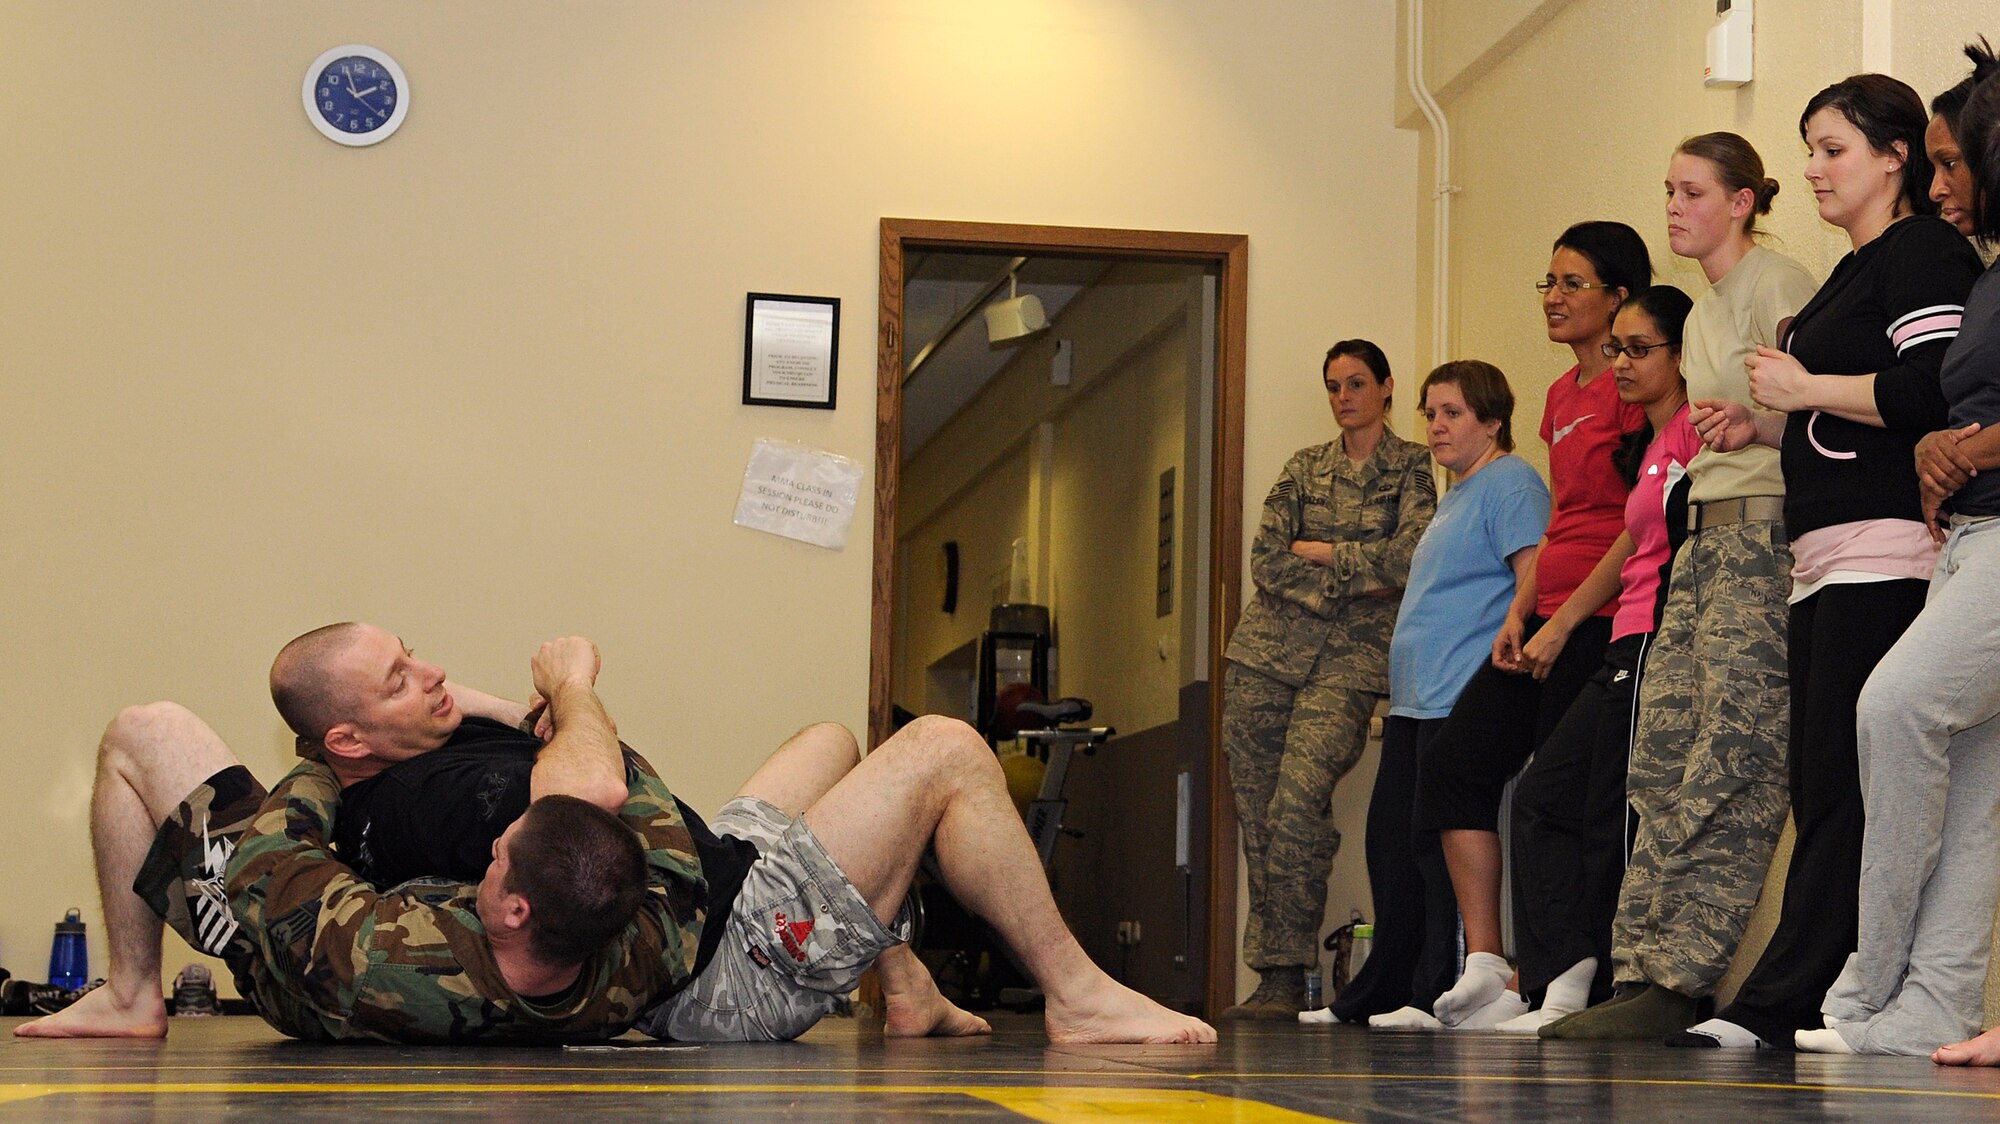 SPANGDAHLEM AIR BASE, Germany – Master Sgt. John Cammarata, 52nd Civil Engineer Squadron member and mixed martial arts coach, demonstrates how to escape someone’s grasp using elbow strikes on Staff Sgt. Danny Hawkins, 52nd Aircraft Maintenance Squadron, during a self-defense class at Skelton Memorial Fitness Center March 26. Approximately 15 women attended the class, which was one of many events held during Sexual Assault Awareness Month. (U.S. Air Force photo/Senior Airman Benjamin Wilson)